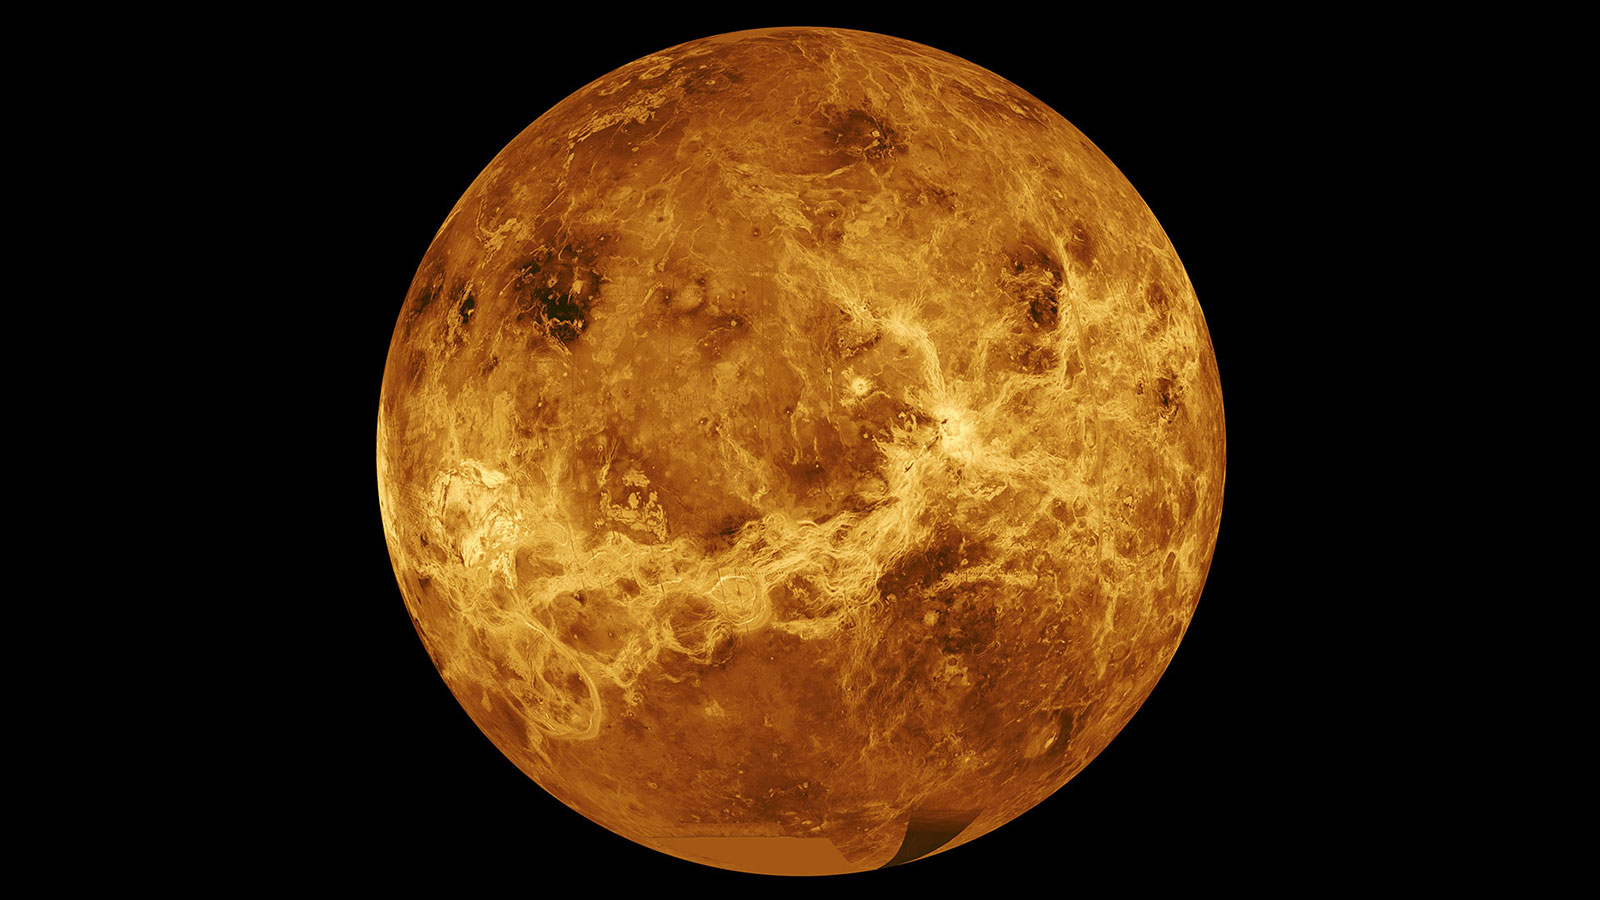 an image of the entire planet of venus, showing craters, and canyons on its surface